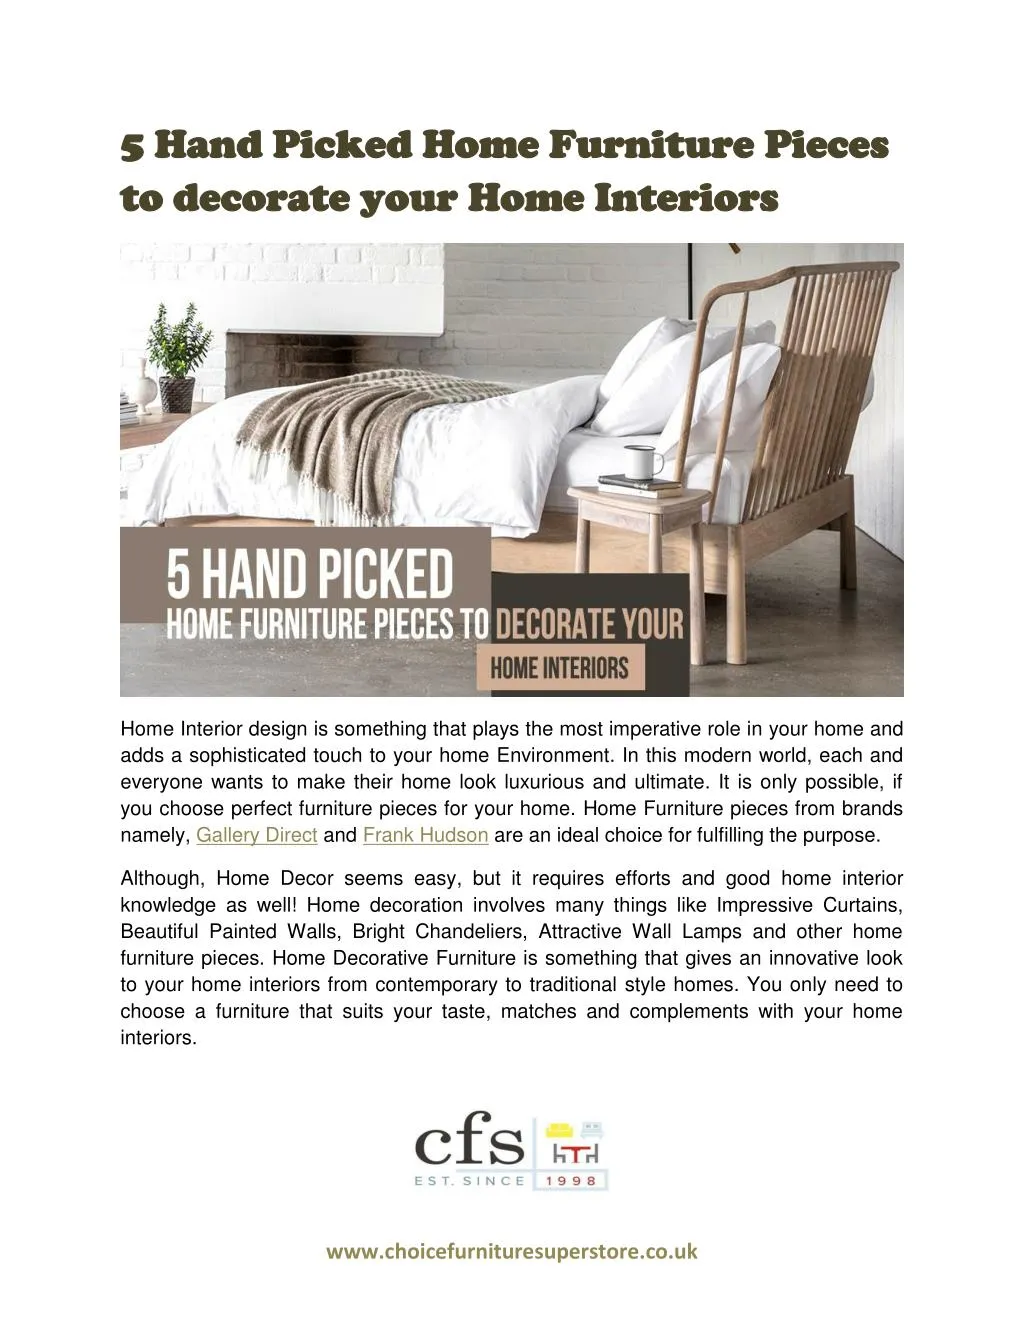 5 hand picked home furniture pieces 5 hand picked